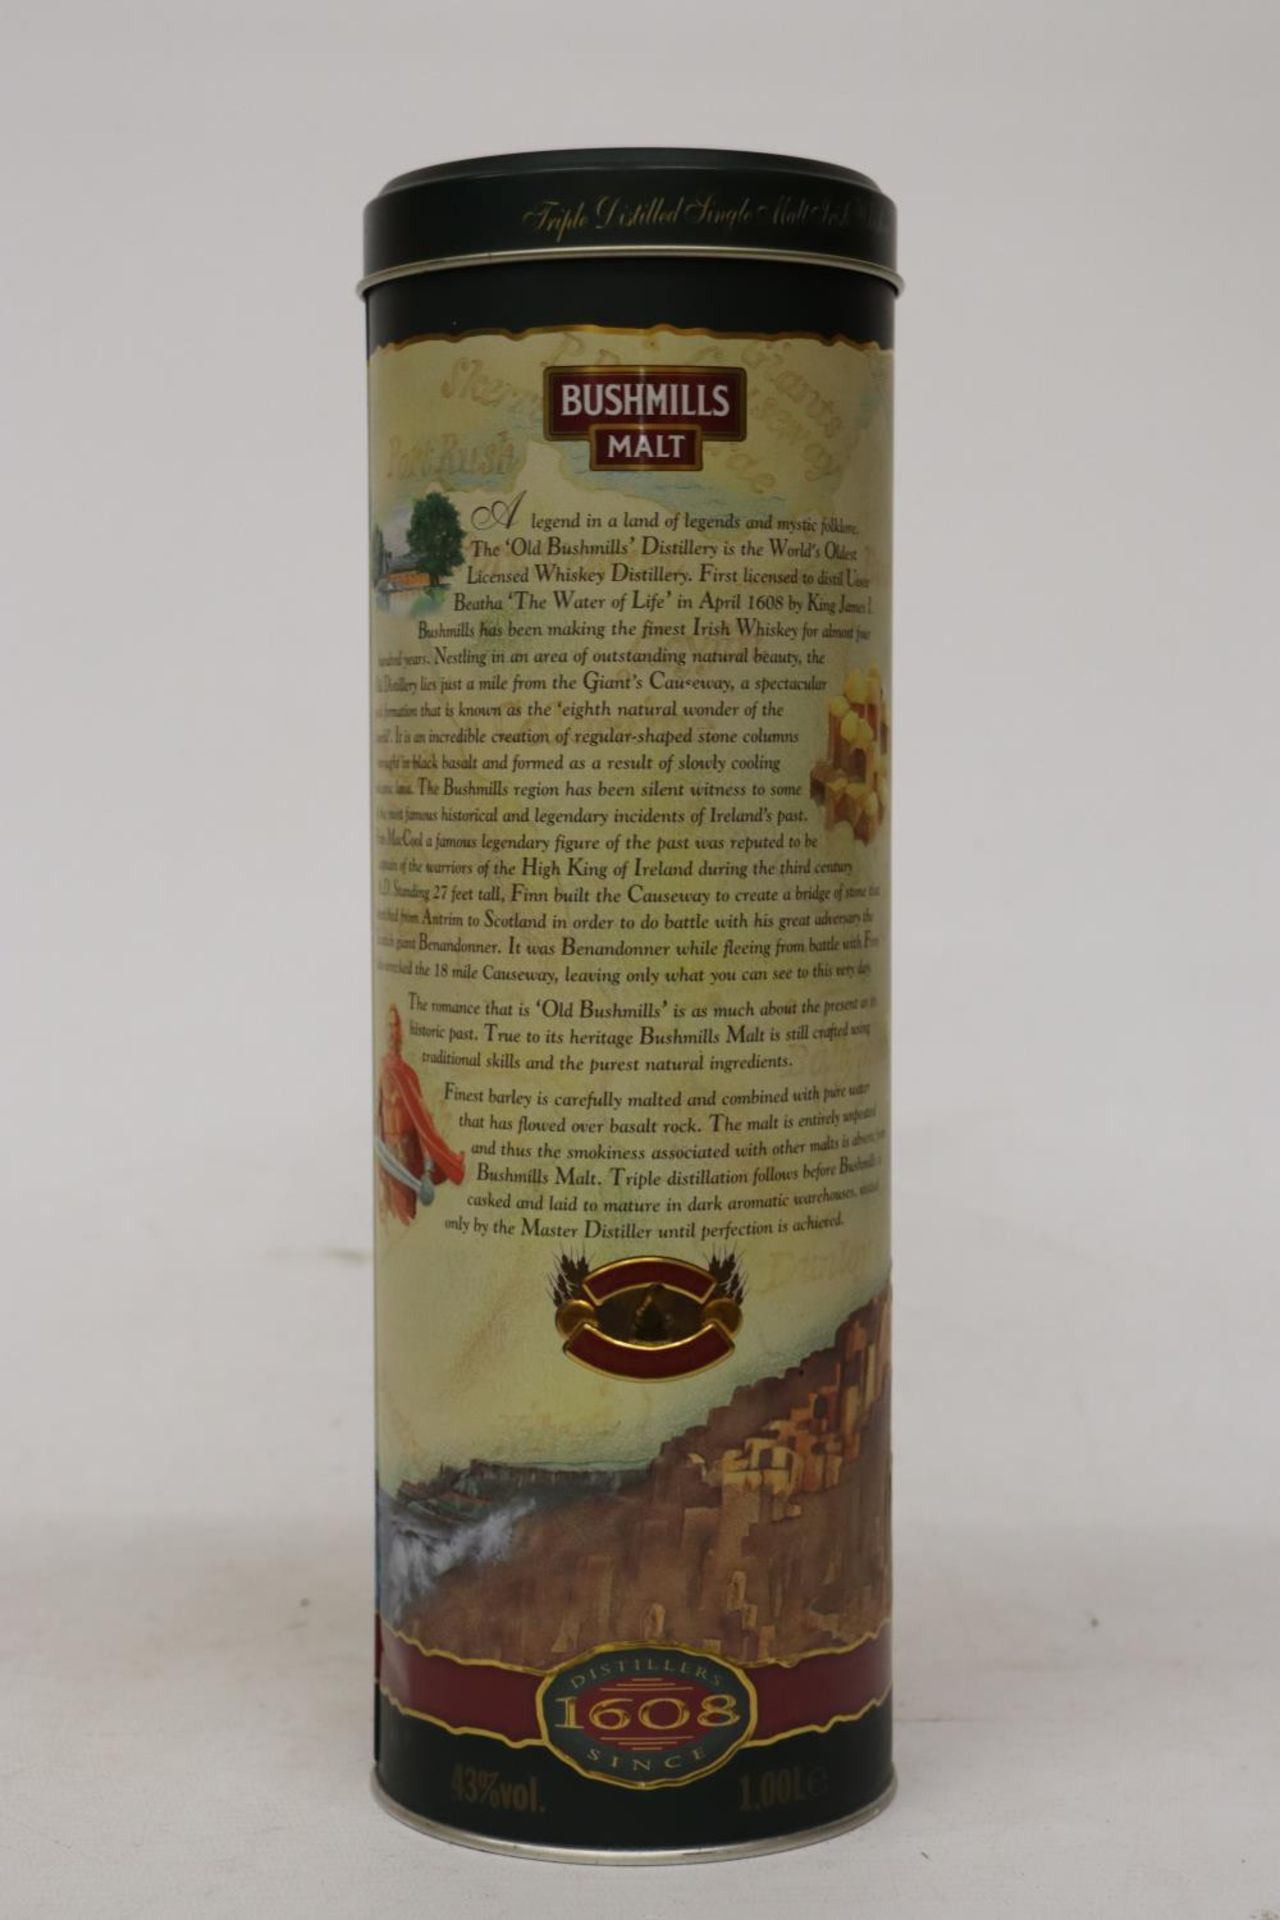 A BOTTLE OF BUSHMILLS 10 YEAR OLD MALT WHISKY, BOXED - Image 5 of 5